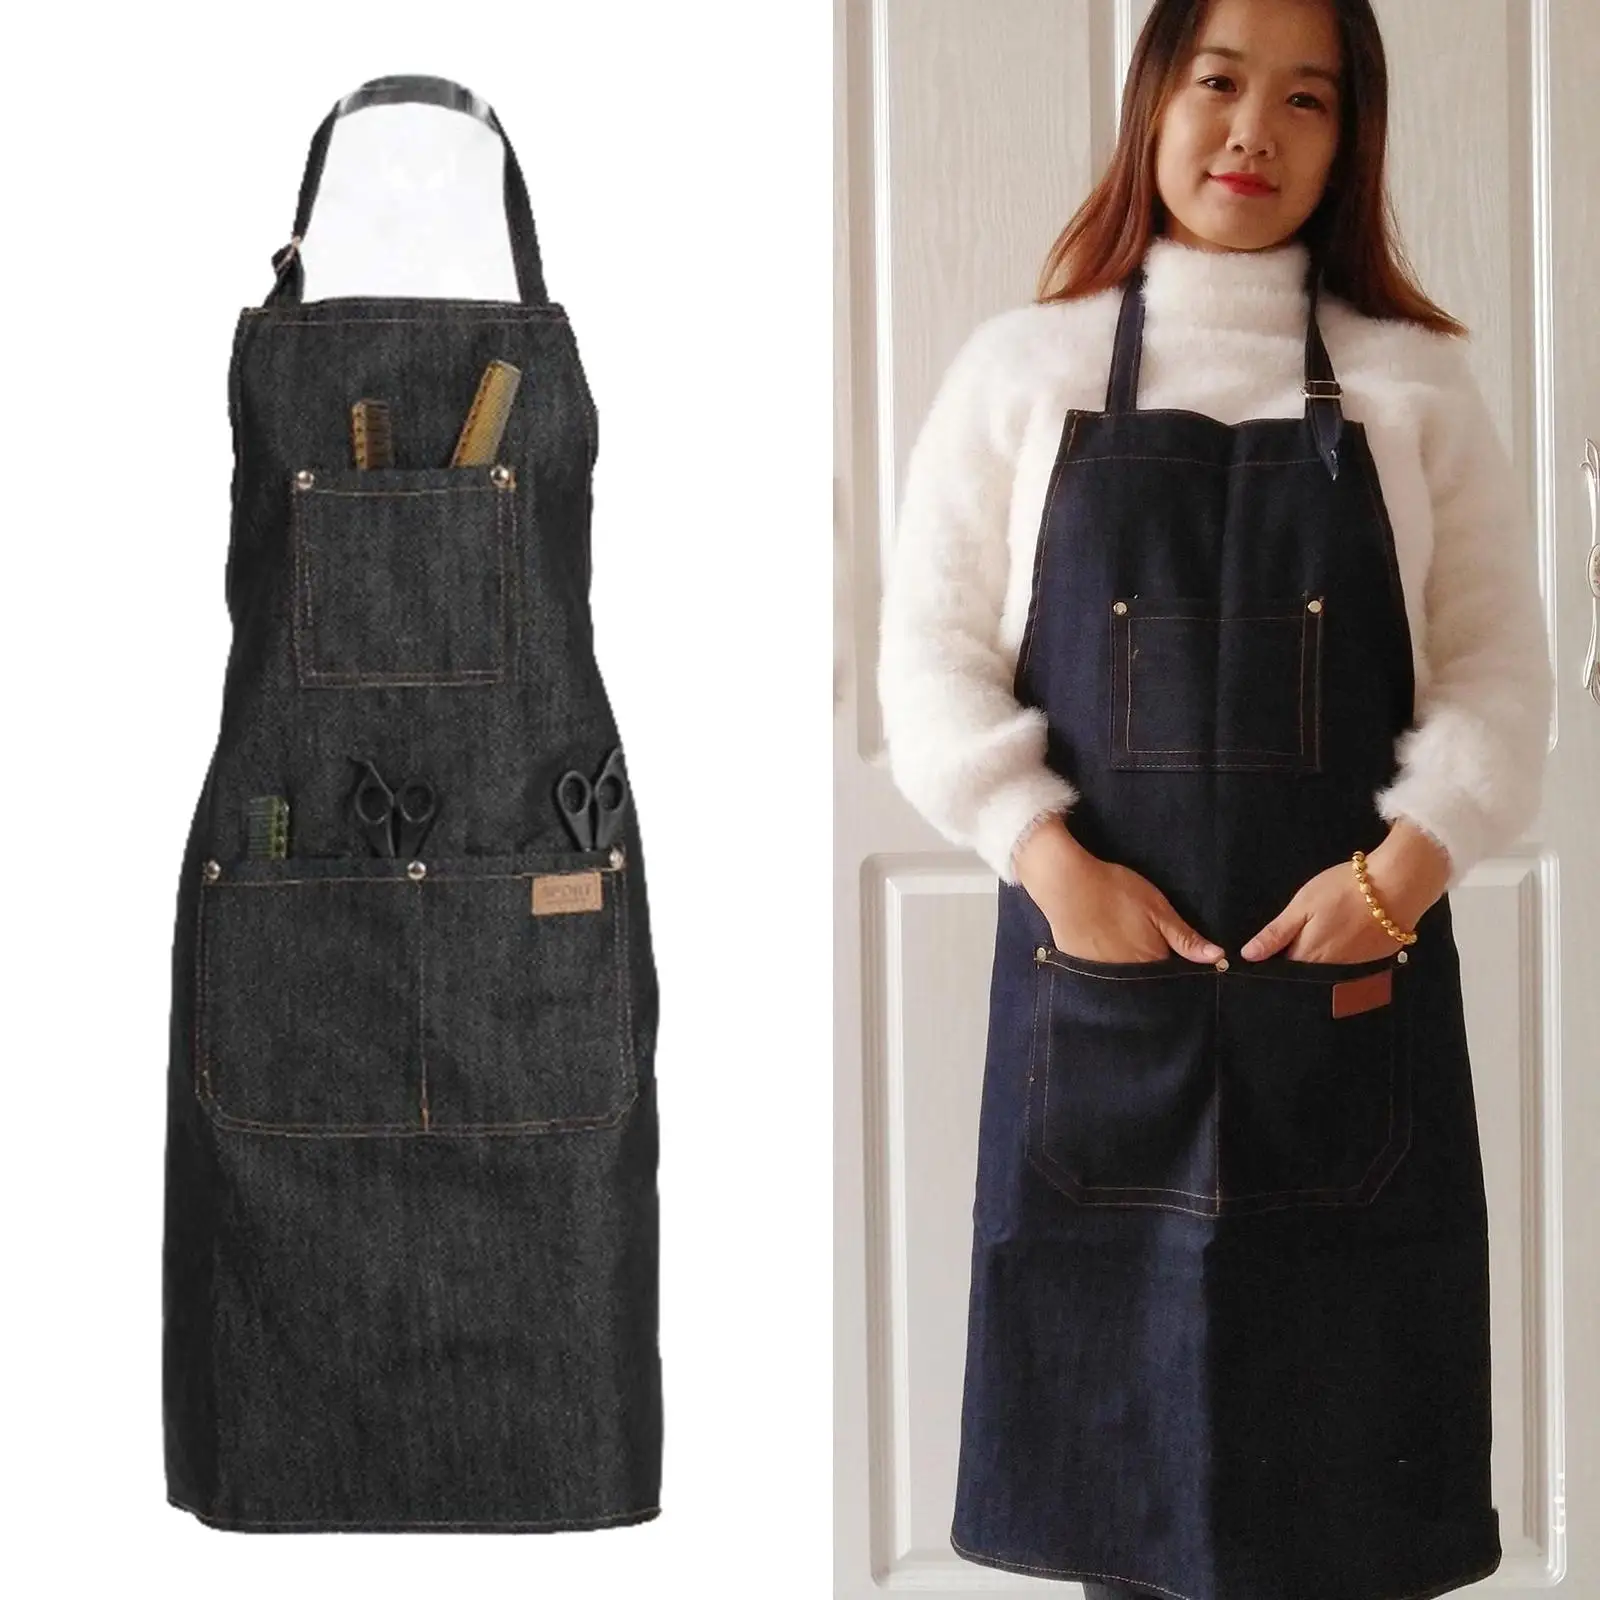 New Professional 3-Pockets Barber Apron Cape Cover Butcher Artist Gown Black